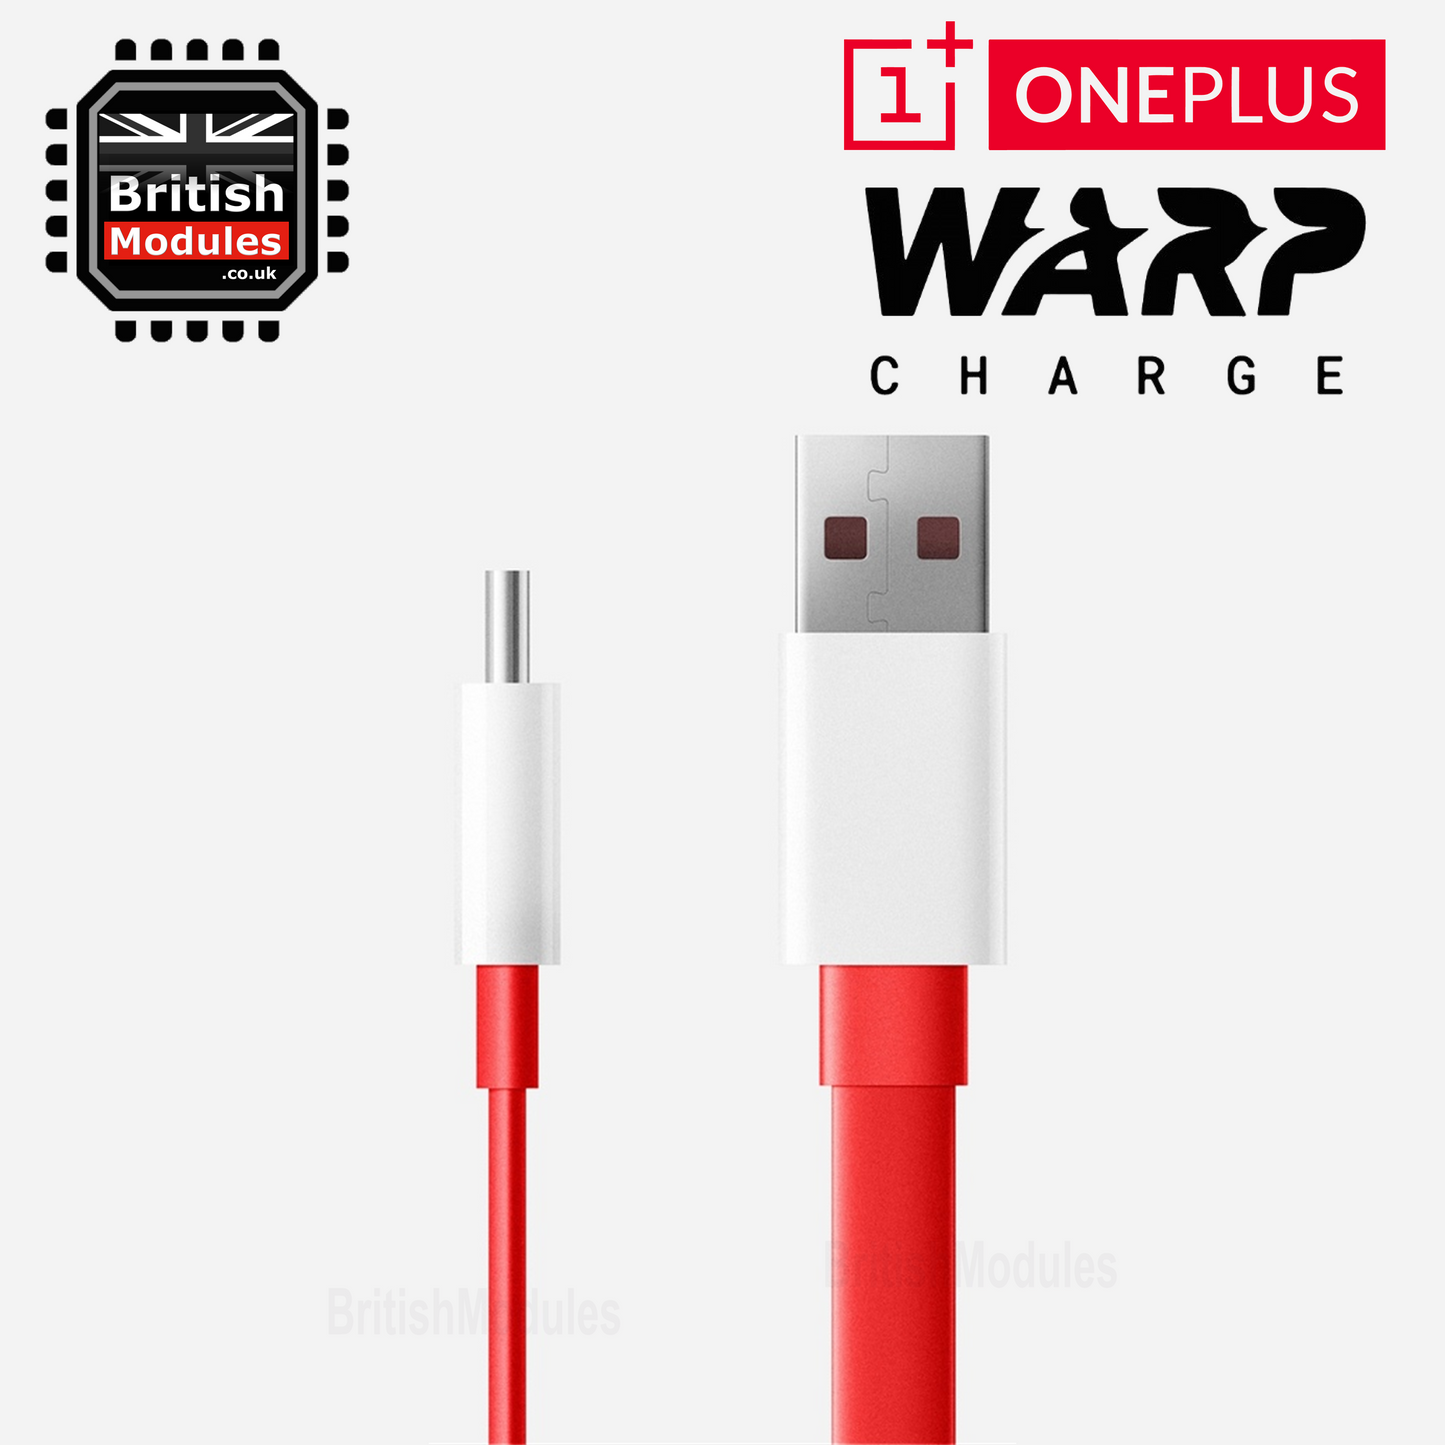 OnePlus SUPERVOOC / Warp Charge Type-C Cable 65W 6.5A Fast Charging 6 6T 7 7T 8 9 Pro